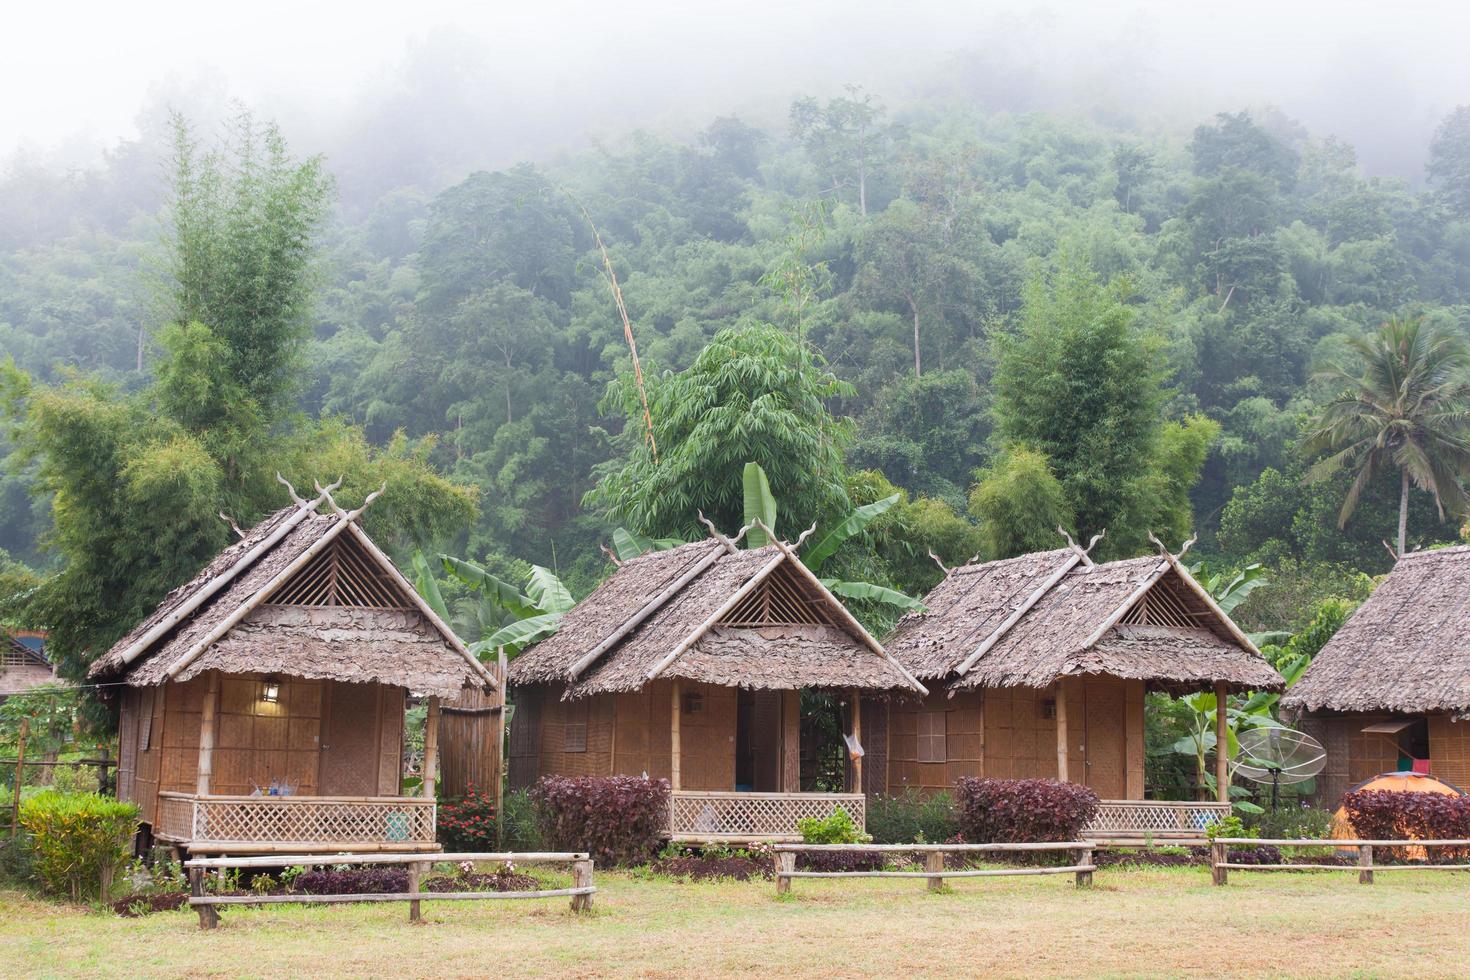 Huts at the forest in Thailand photo